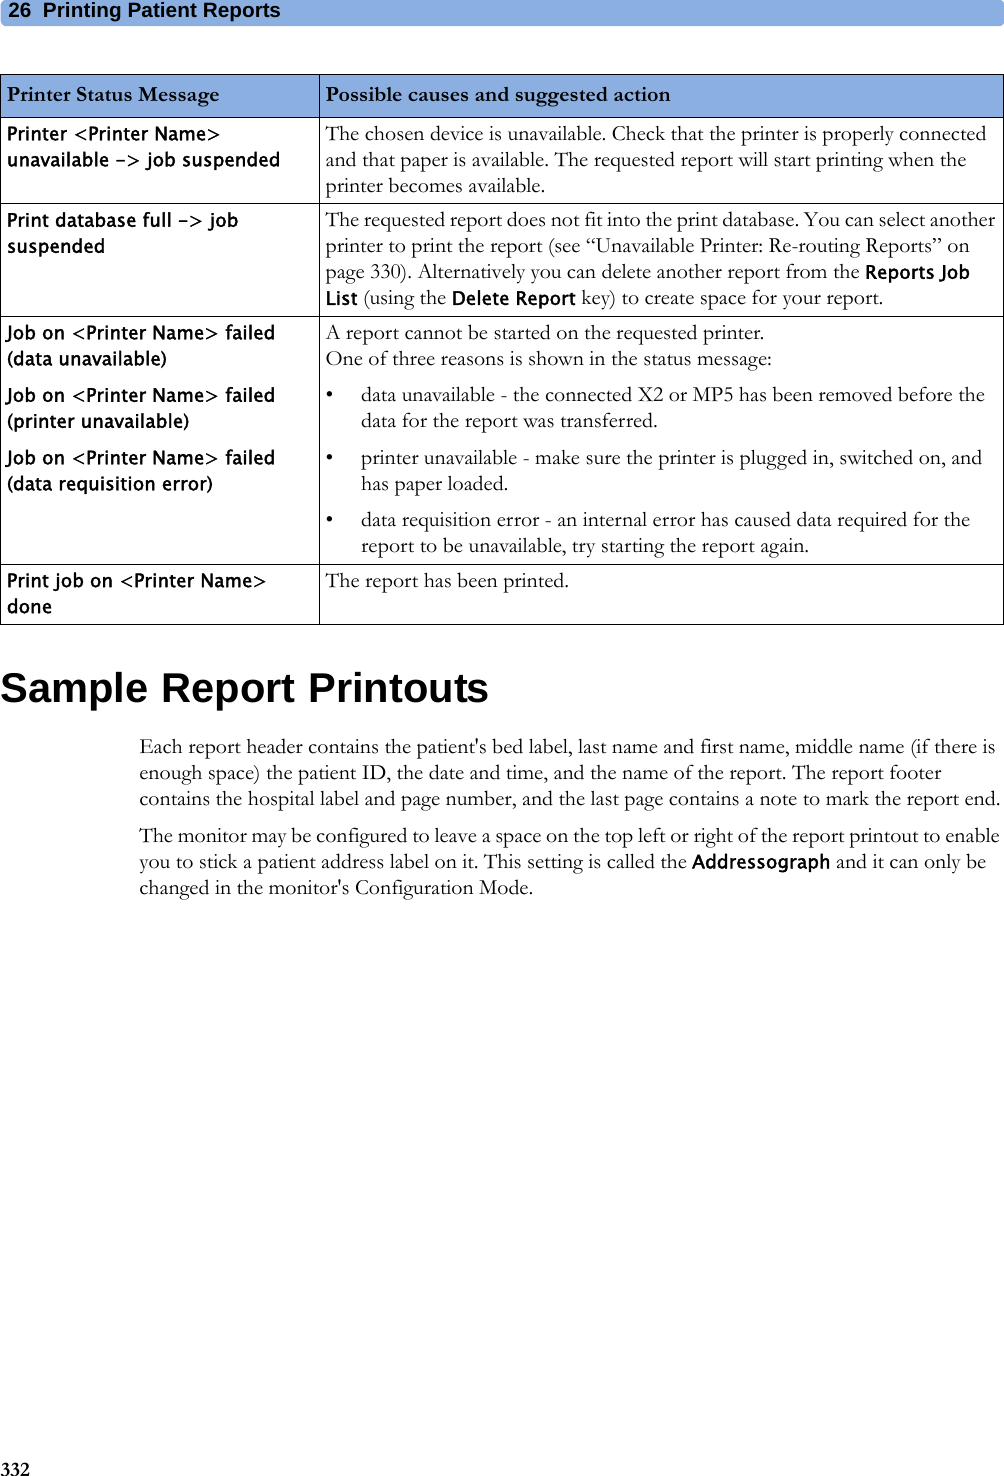 26 Printing Patient Reports332Sample Report PrintoutsEach report header contains the patient&apos;s bed label, last name and first name, middle name (if there is enough space) the patient ID, the date and time, and the name of the report. The report footer contains the hospital label and page number, and the last page contains a note to mark the report end.The monitor may be configured to leave a space on the top left or right of the report printout to enable you to stick a patient address label on it. This setting is called the Addressograph and it can only be changed in the monitor&apos;s Configuration Mode.Printer &lt;Printer Name&gt; unavailable -&gt; job suspendedThe chosen device is unavailable. Check that the printer is properly connected and that paper is available. The requested report will start printing when the printer becomes available.Print database full -&gt; job suspendedThe requested report does not fit into the print database. You can select another printer to print the report (see “Unavailable Printer: Re-routing Reports” on page 330). Alternatively you can delete another report from the Reports Job List (using the Delete Report key) to create space for your report.Job on &lt;Printer Name&gt; failed (data unavailable)Job on &lt;Printer Name&gt; failed (printer unavailable)Job on &lt;Printer Name&gt; failed (data requisition error)A report cannot be started on the requested printer. One of three reasons is shown in the status message:• data unavailable - the connected X2 or MP5 has been removed before the data for the report was transferred.• printer unavailable - make sure the printer is plugged in, switched on, and has paper loaded.• data requisition error - an internal error has caused data required for the report to be unavailable, try starting the report again.Print job on &lt;Printer Name&gt; doneThe report has been printed.Printer Status Message Possible causes and suggested action